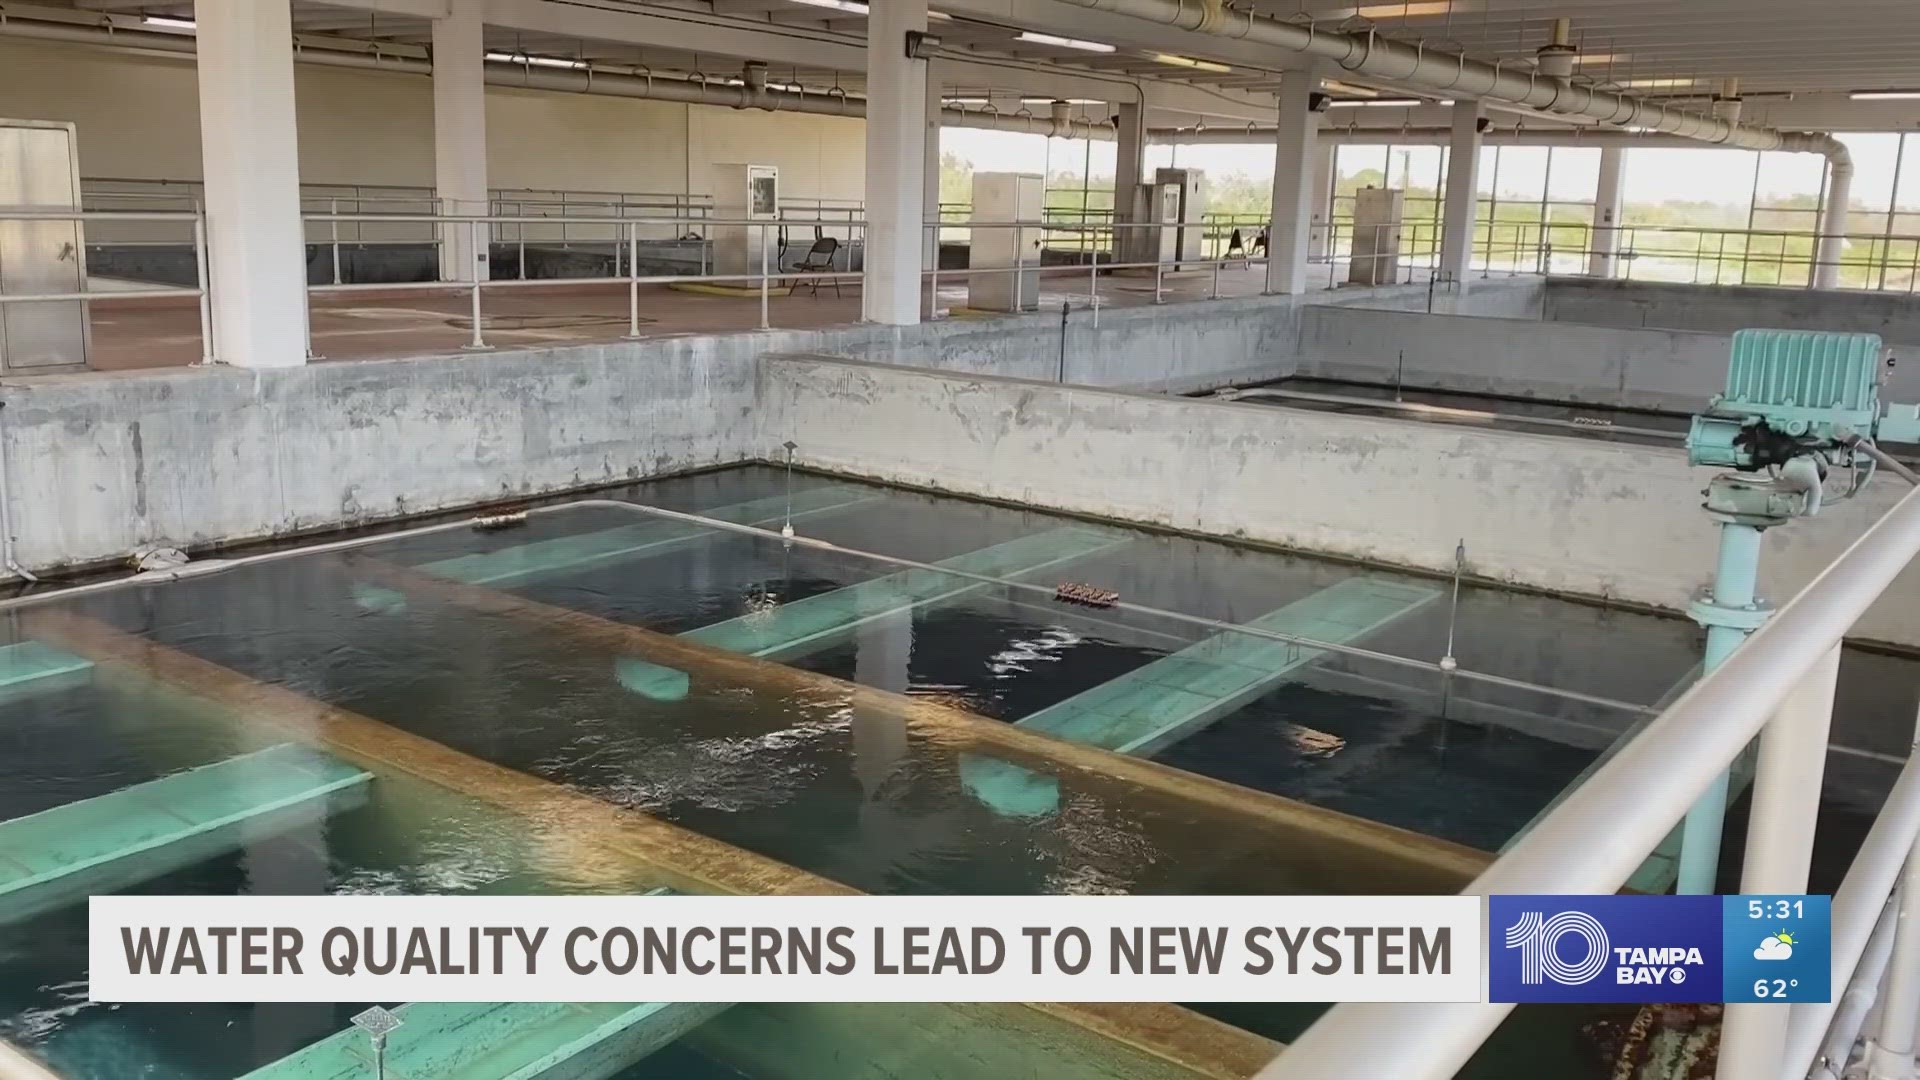 A new water filtration system will soon service more than 300,000 homes in Manatee County